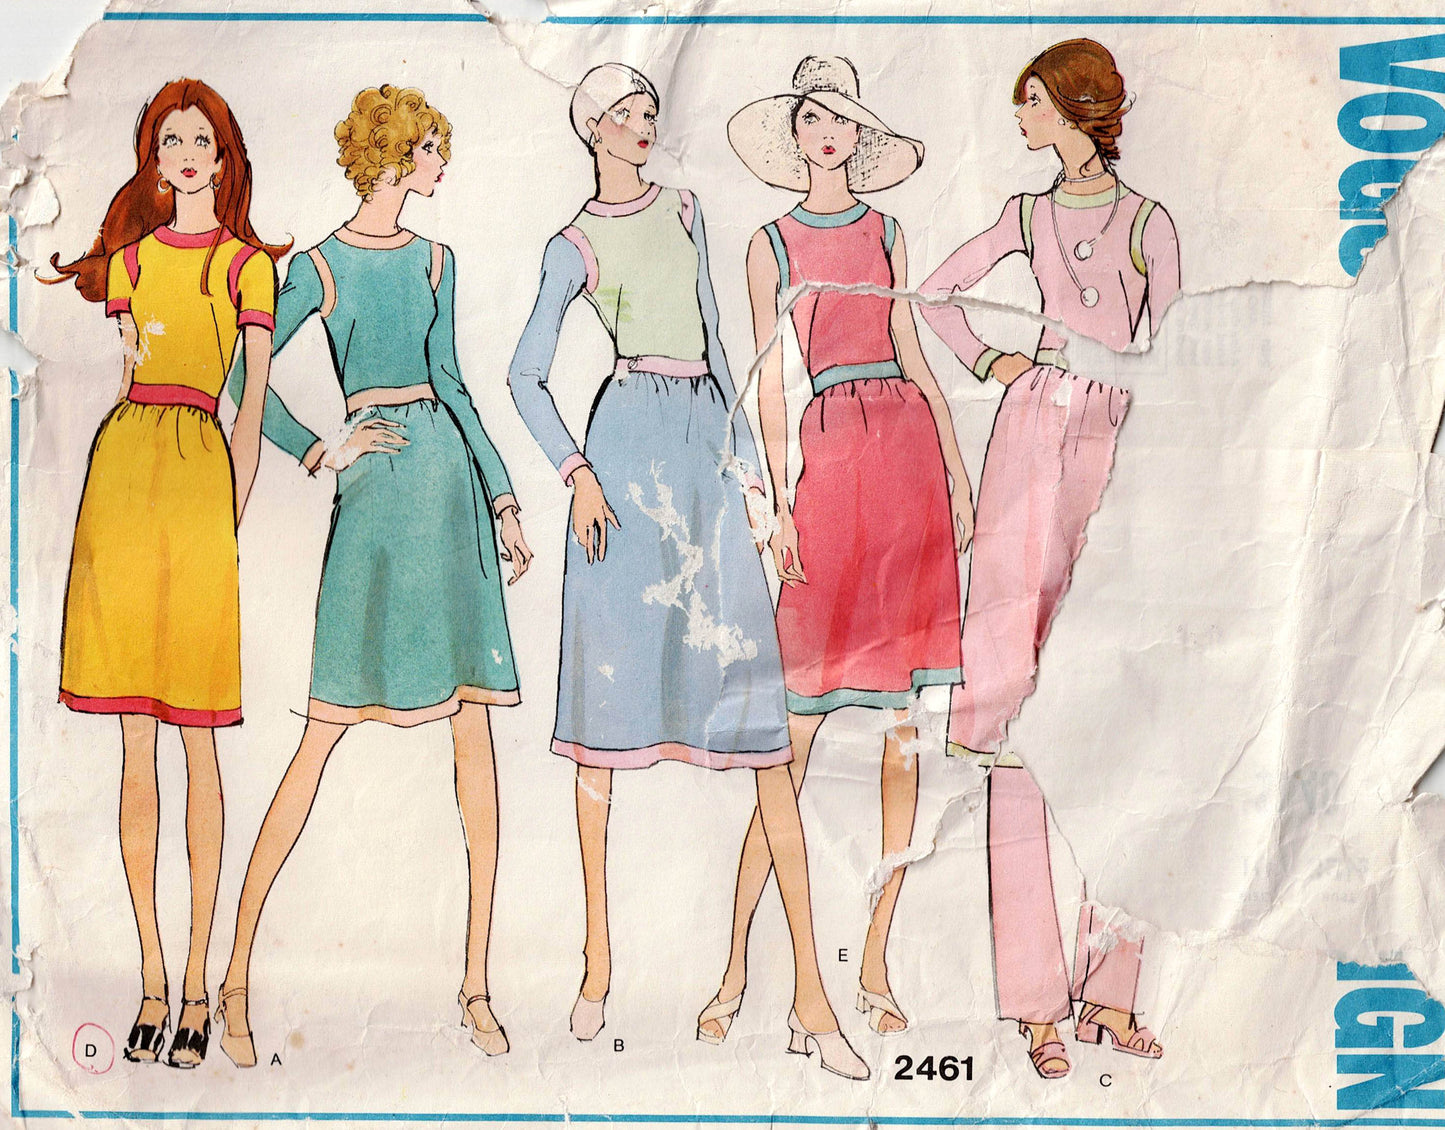 Vogue Basic Design 2461 Womens Contrast Trimmed Dress & Pants 1970s Vintage Sewing Pattern Size 10 Bust 32.5 inches